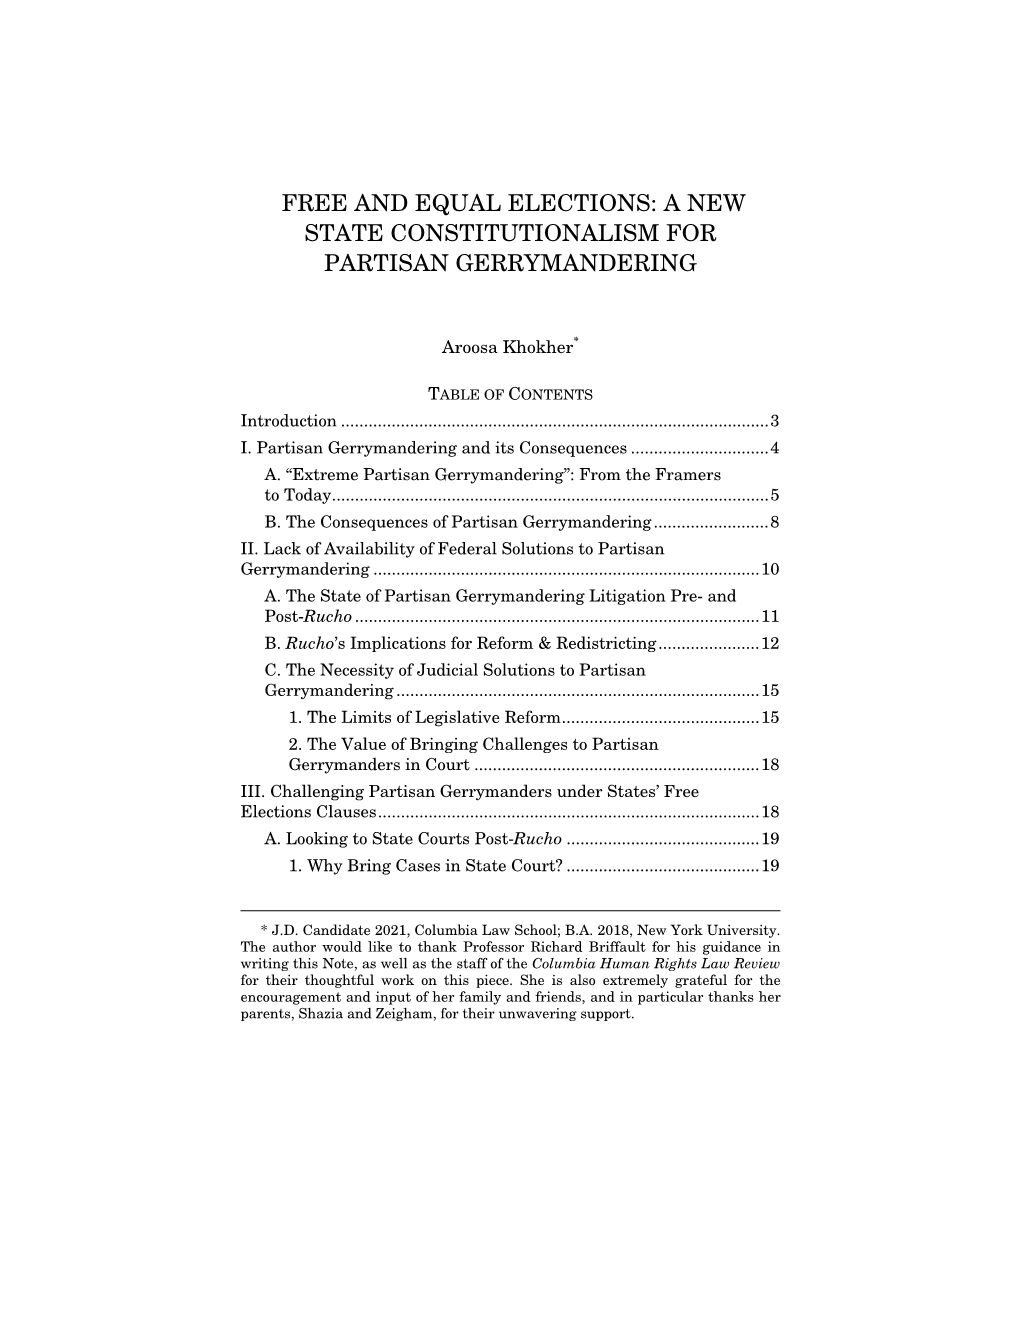 Free and Equal Elections: a New State Constitutionalism for Partisan Gerrymandering